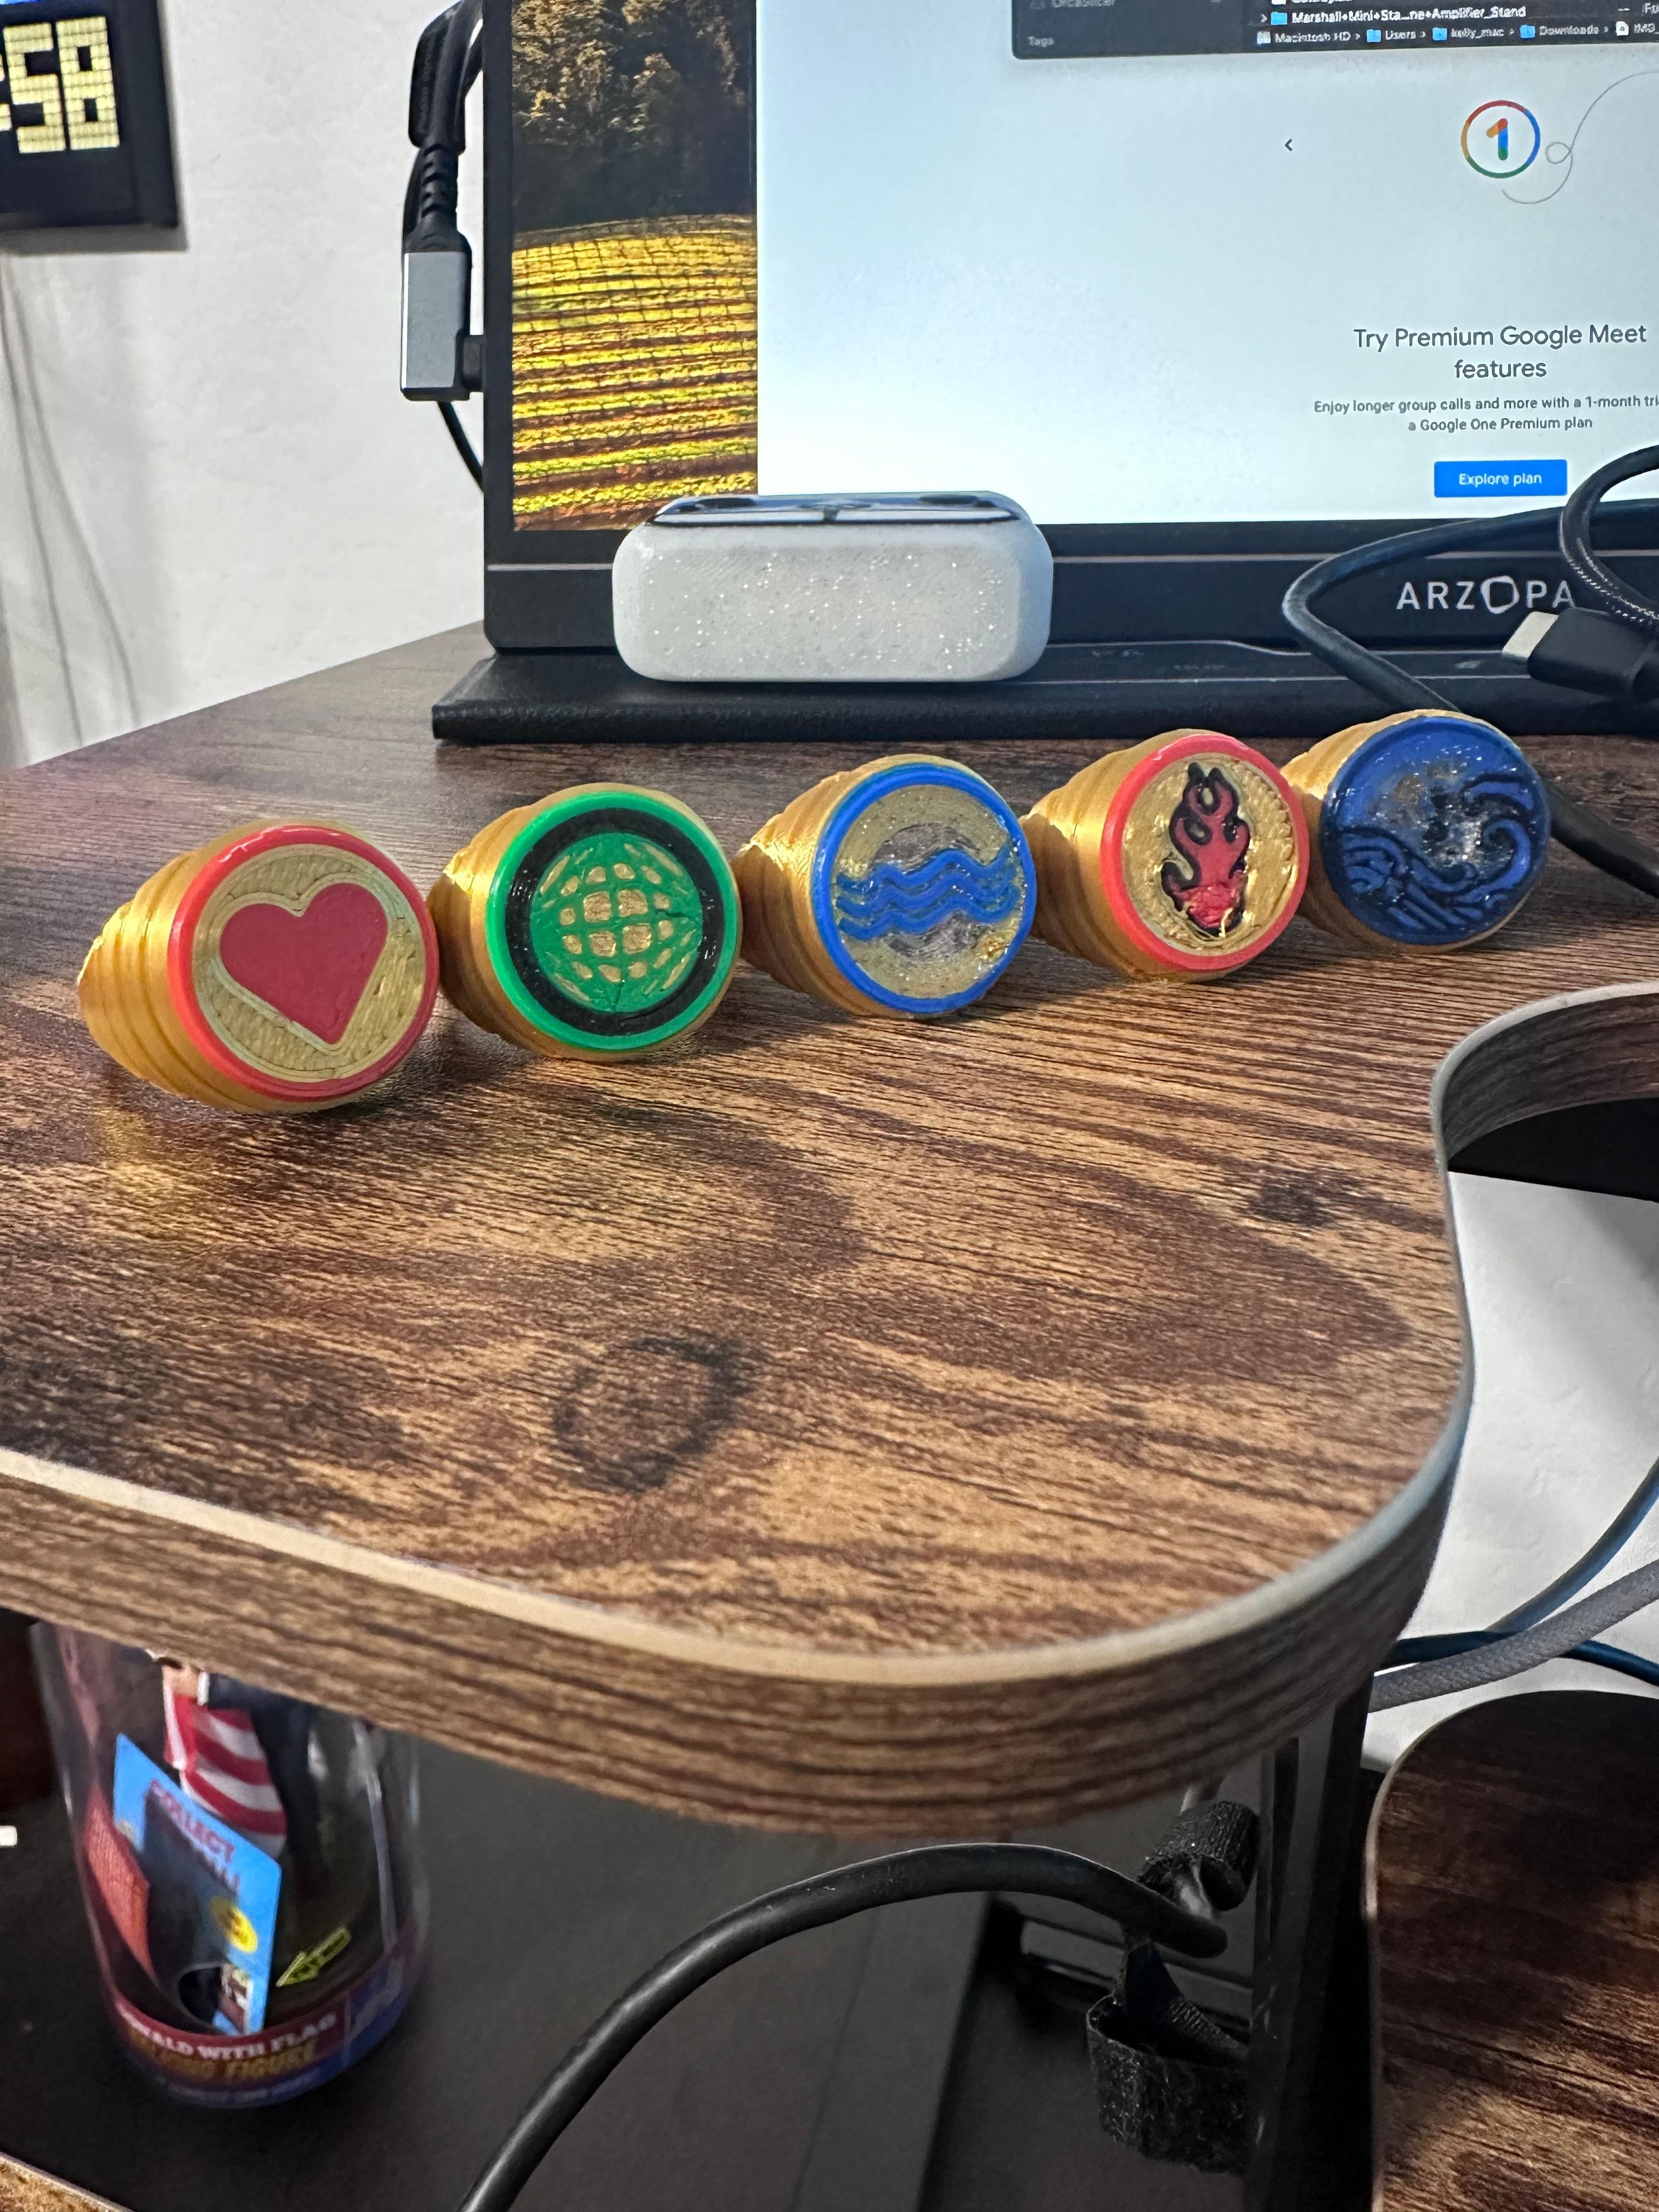 Captain Planet Rings - Fire, Water, Wind, Earth, and, Heart rings 3d model